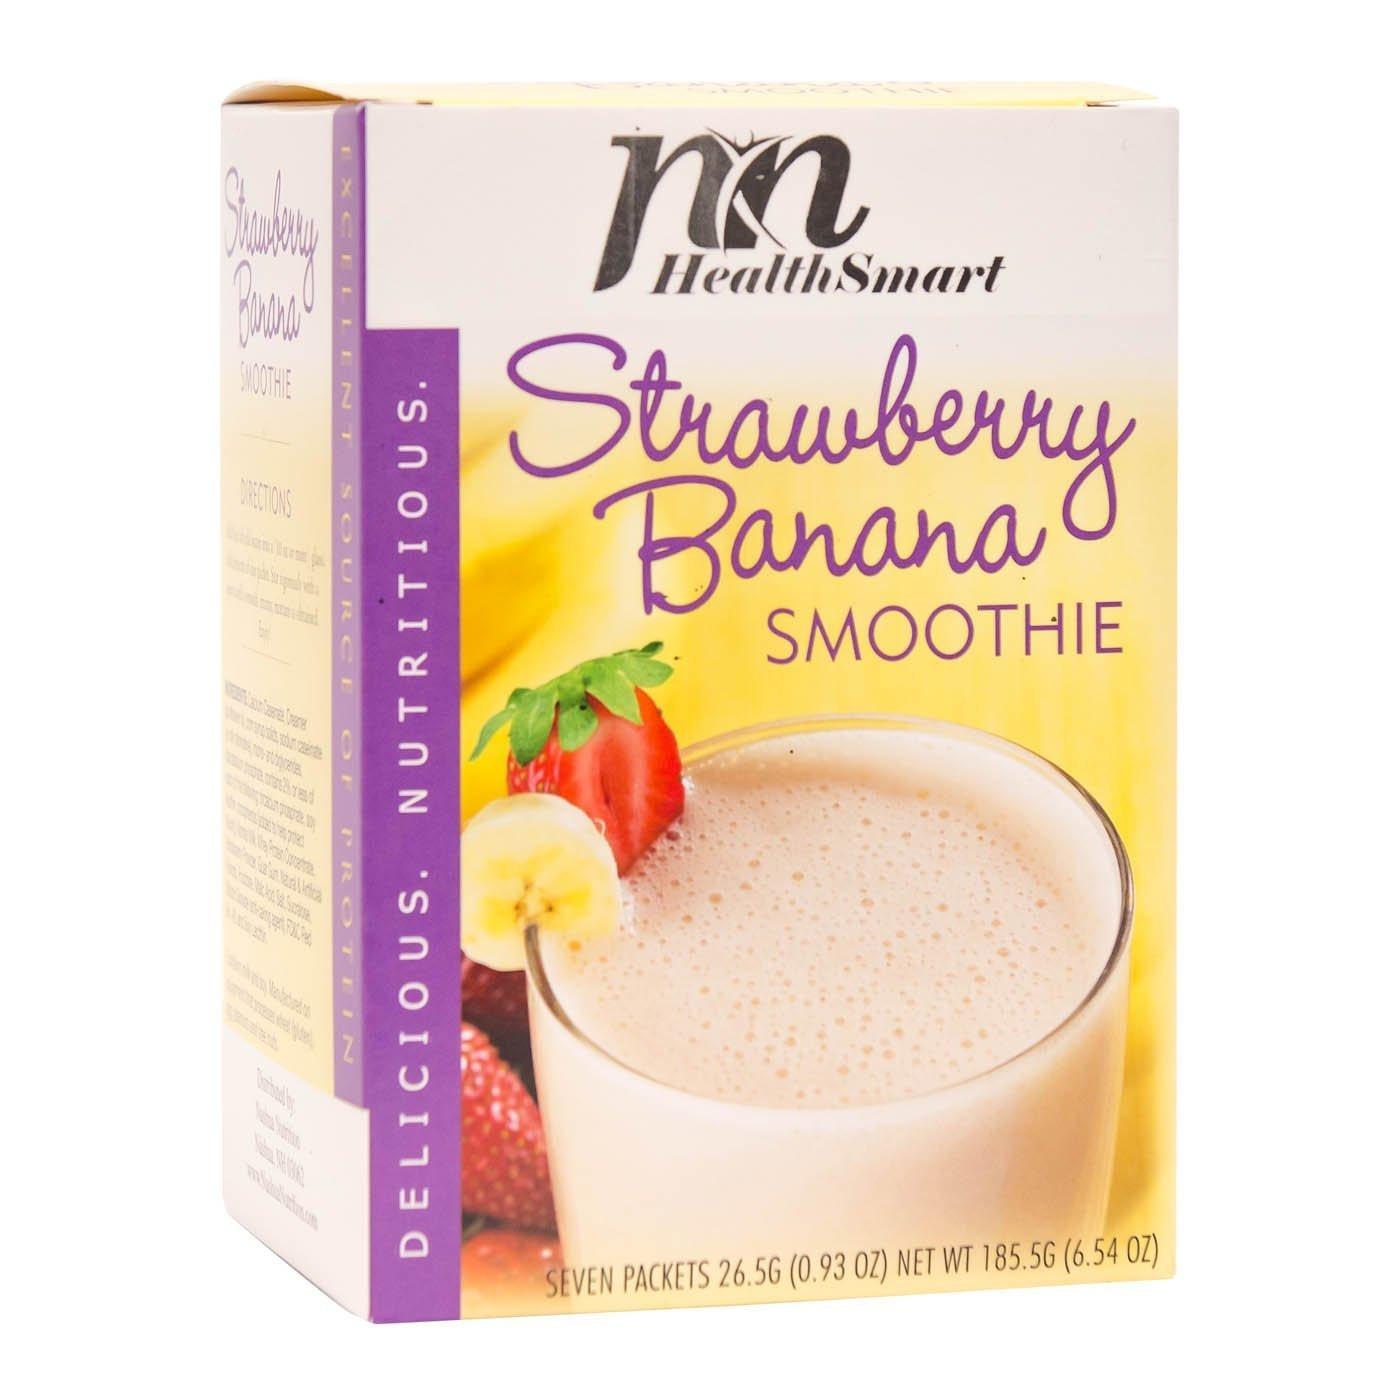 Low Carb Low Calorie Smoothies
 HealthSmart High Protein Diet Fruit Smoothie